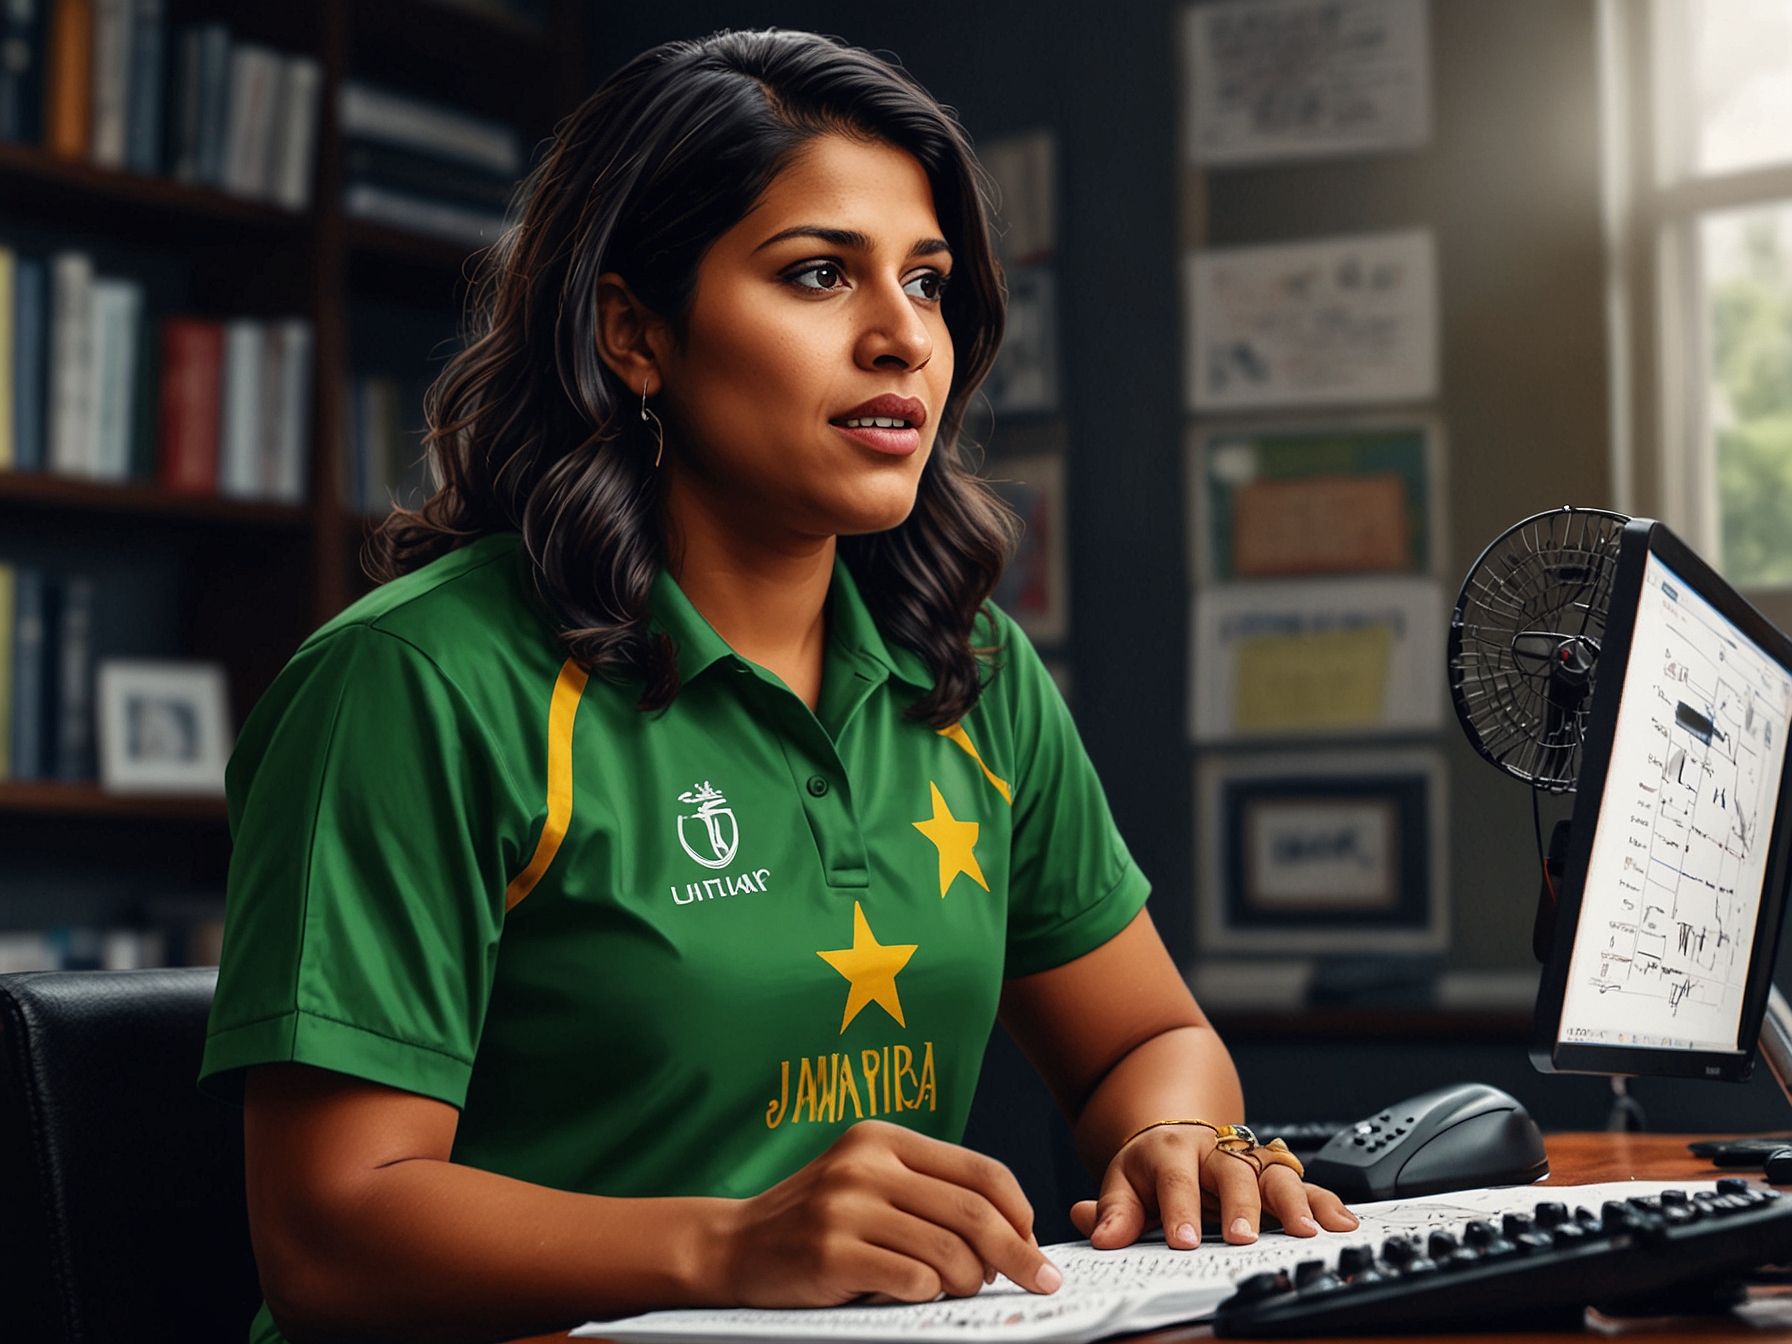 Lisa Sthalekar speaking as a commentator during a live cricket match, expressing her views on Pakistan's senior players and their impact on the team's T20 World Cup performance.